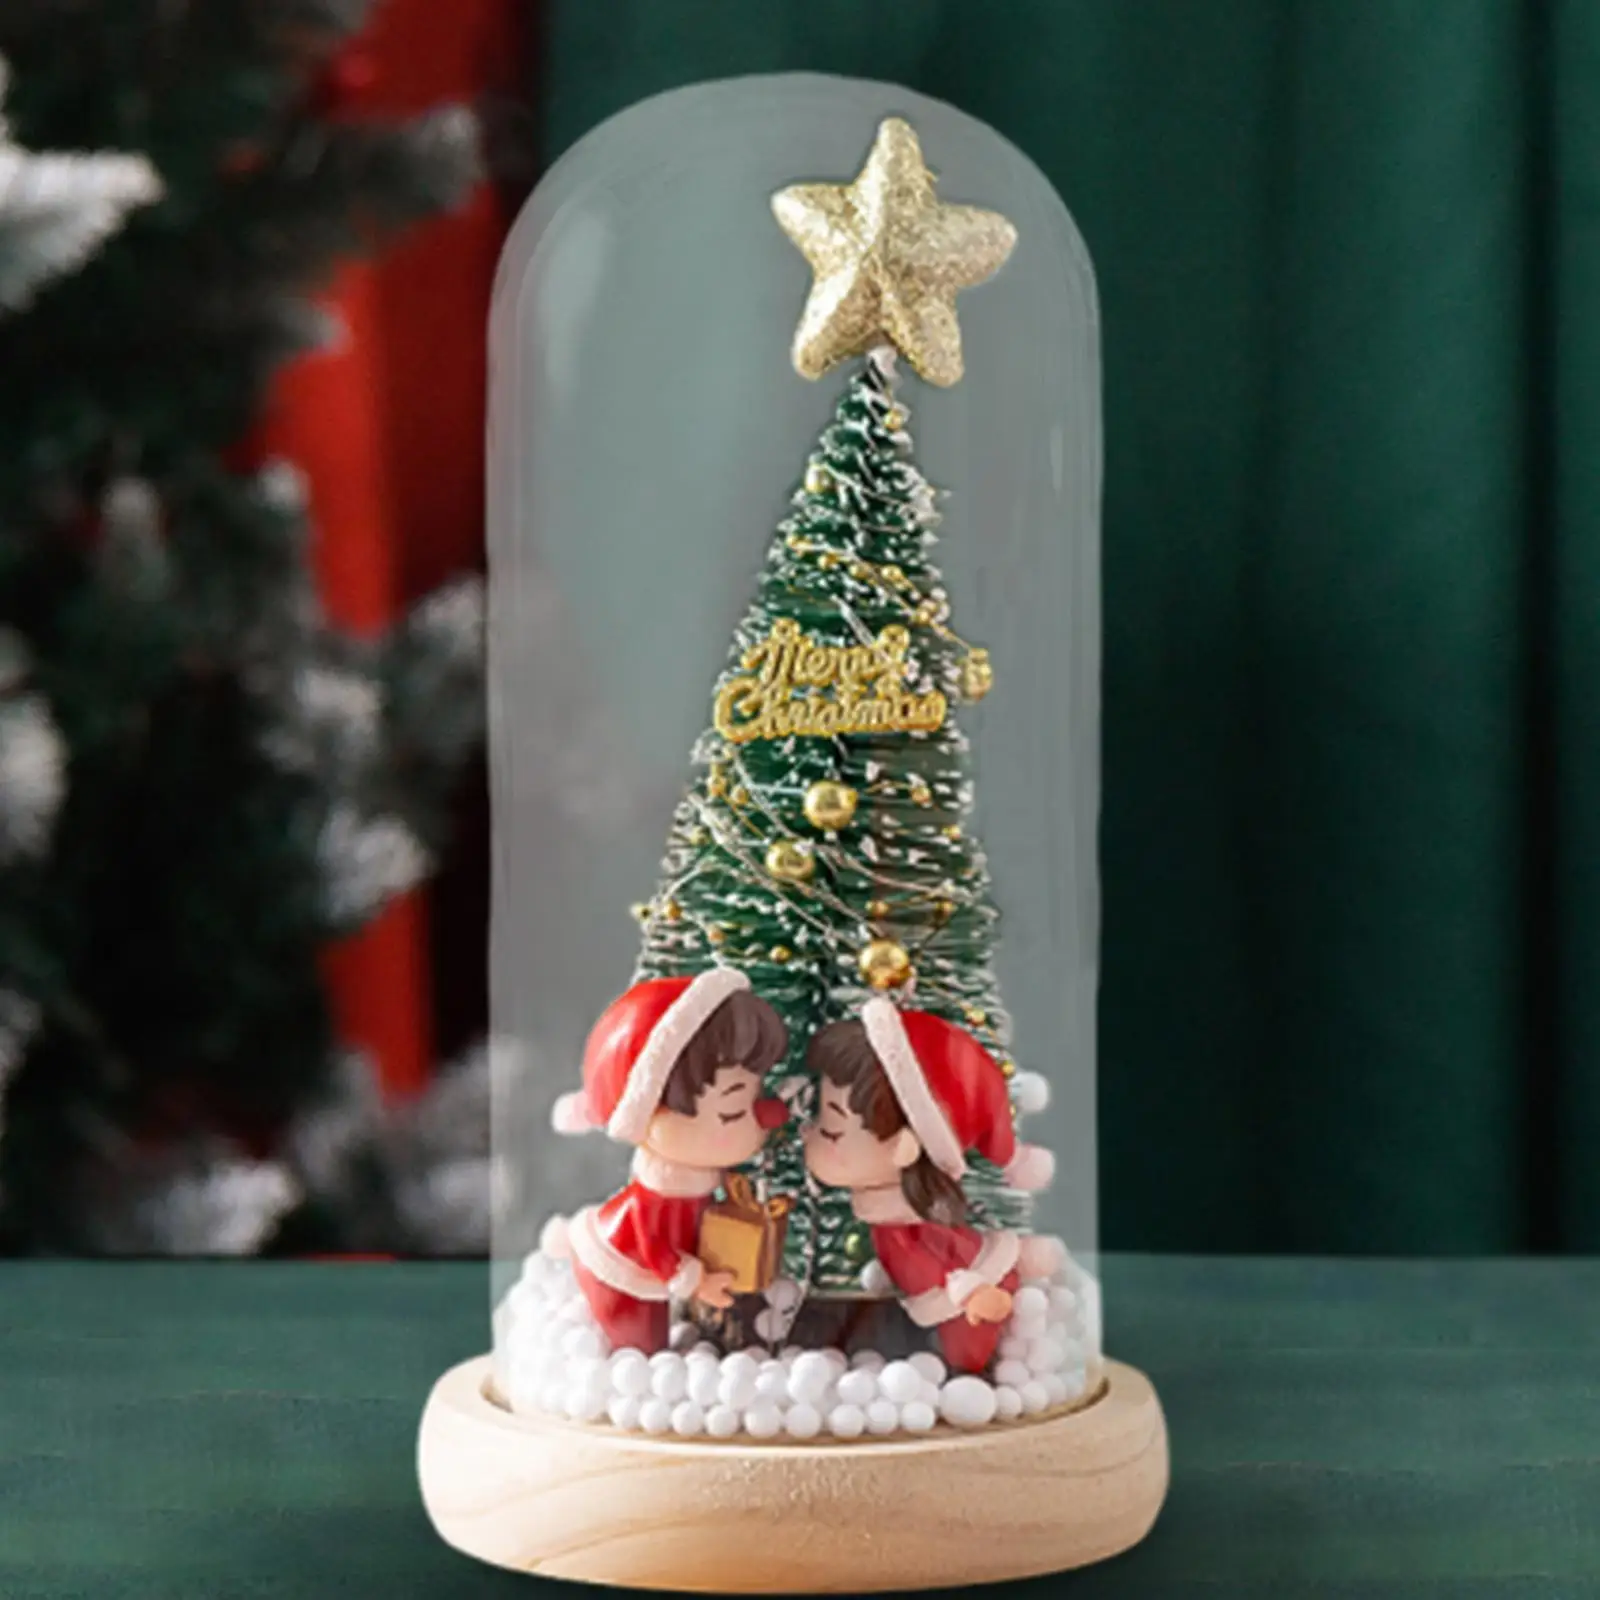 Tabletop Mini Christmas Tree with LED Decorative Simulation Christmas Ornament Crafts for Office Indoor Festival Shelf Desktop